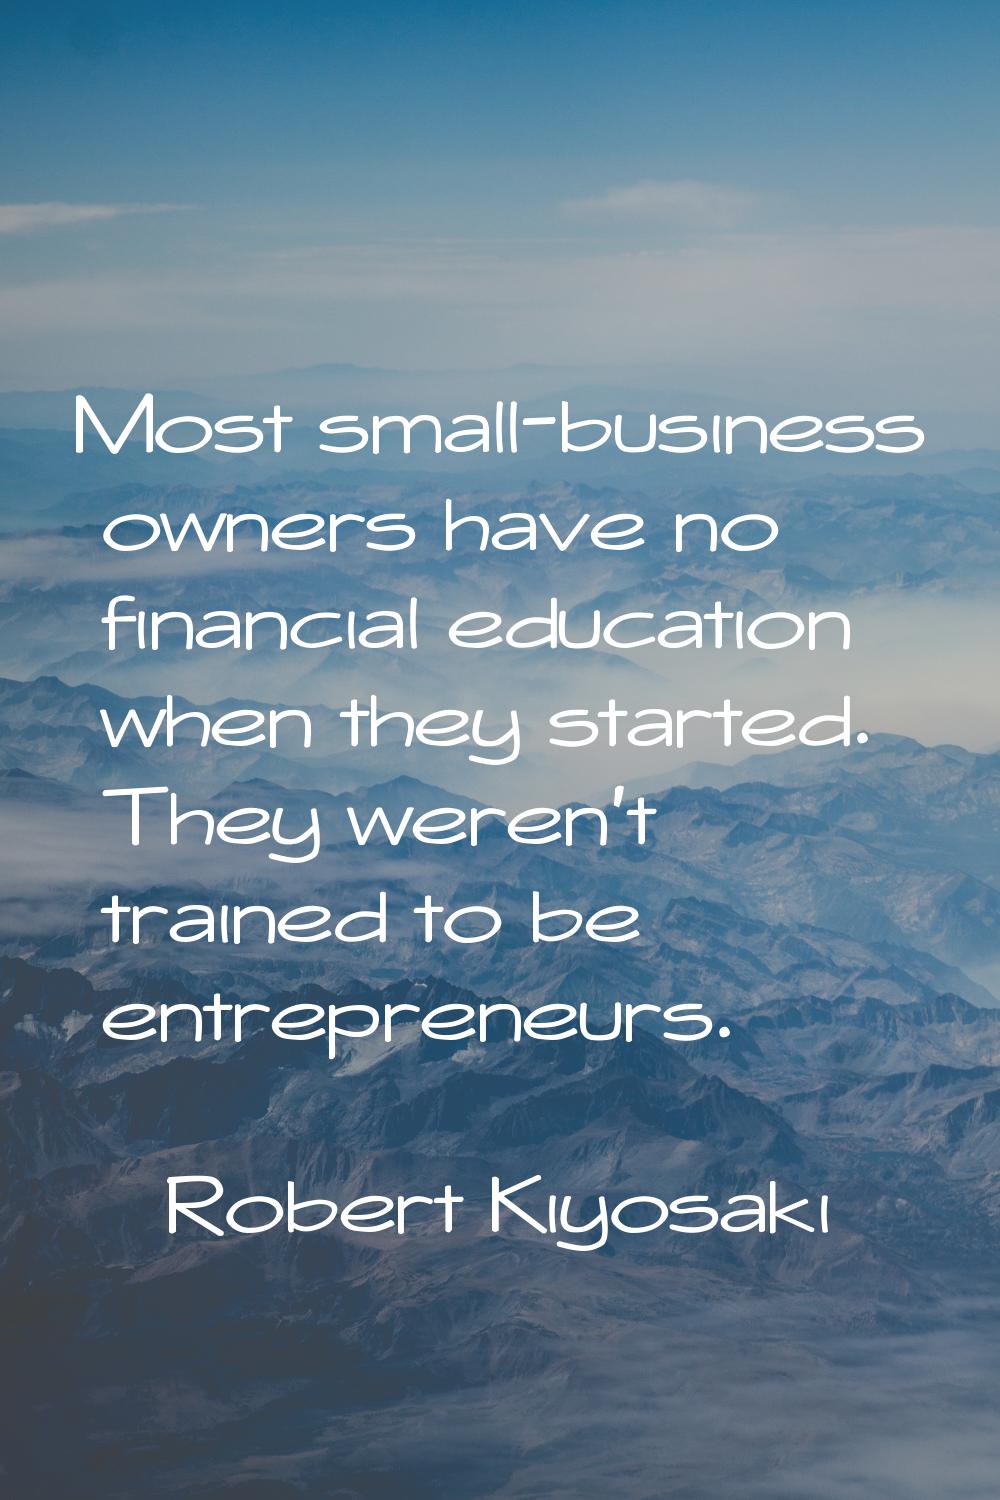 Most small-business owners have no financial education when they started. They weren't trained to b